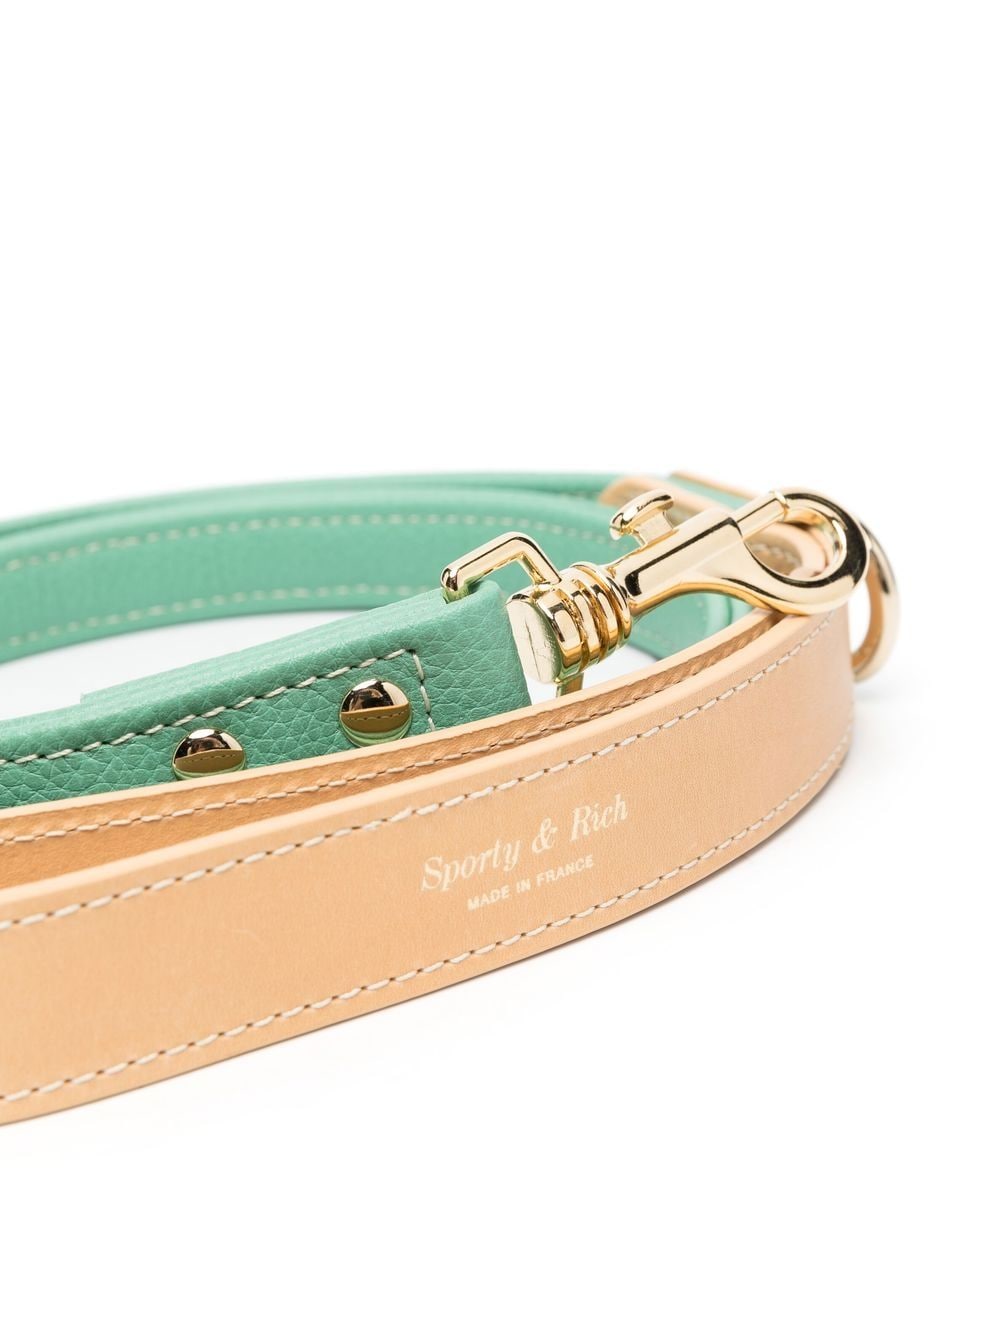 Shop Sporty And Rich Leather Pet Lead In Grün